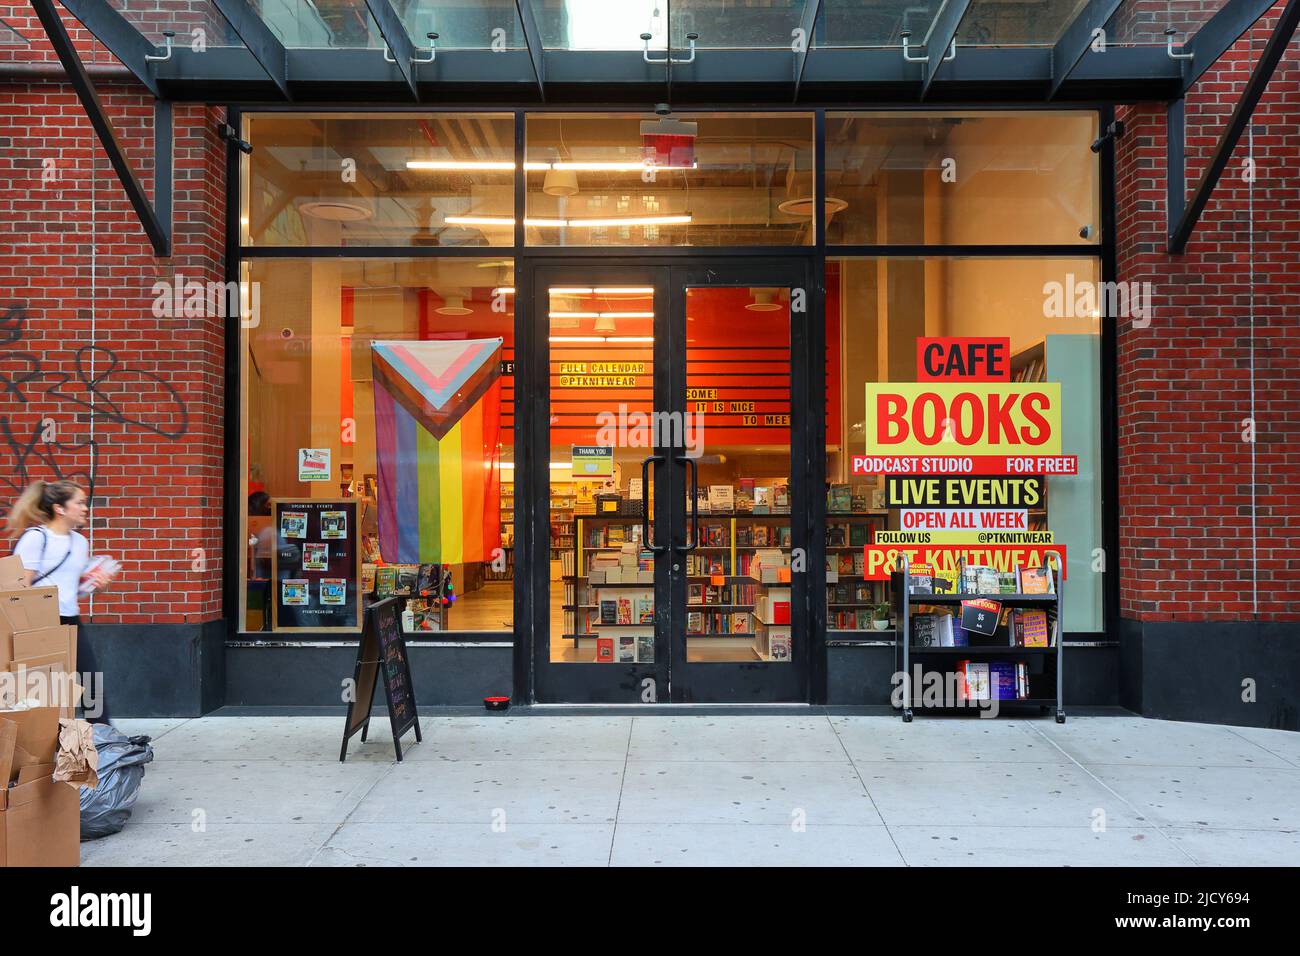 P&T Knitwear Books & Podcasts, 180 Orchard St, New York, NYC storefront photo of an independent bookstore in the Lower East Side in Manhattan. Stock Photo